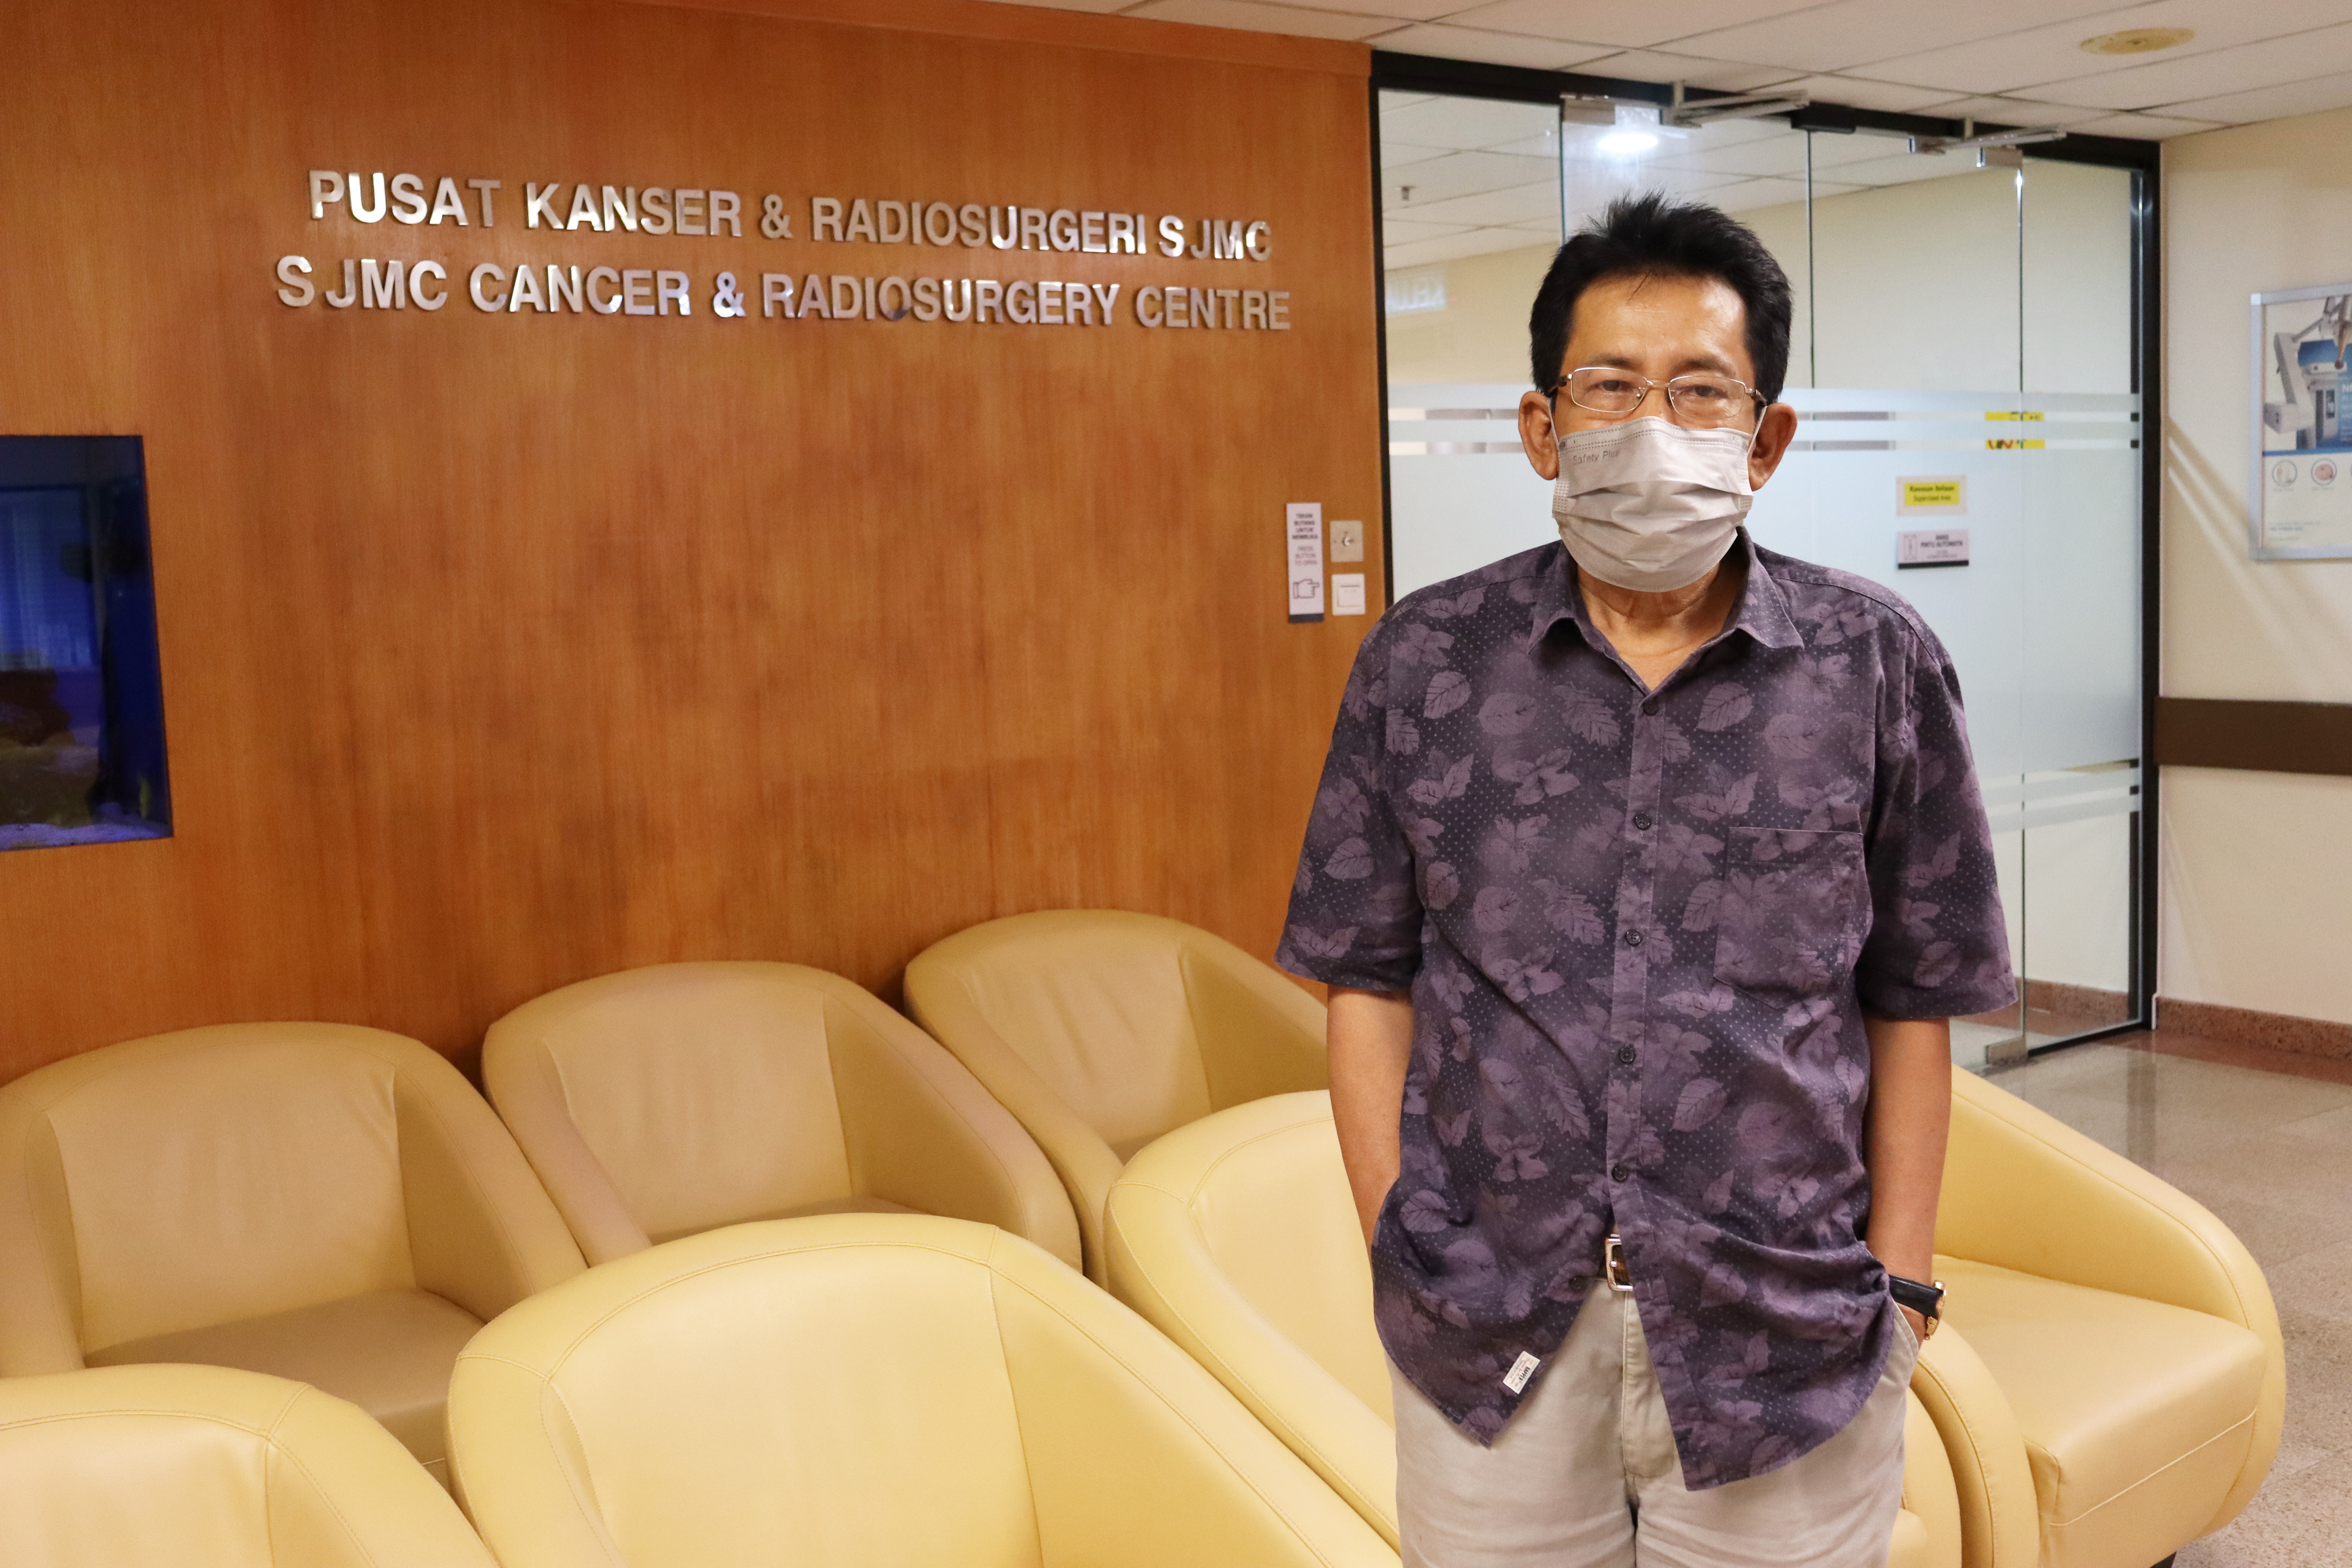 Lung Cancer Survivor is First Patient in Malaysia Treated With Tomotherapy Synchrony at SJMC